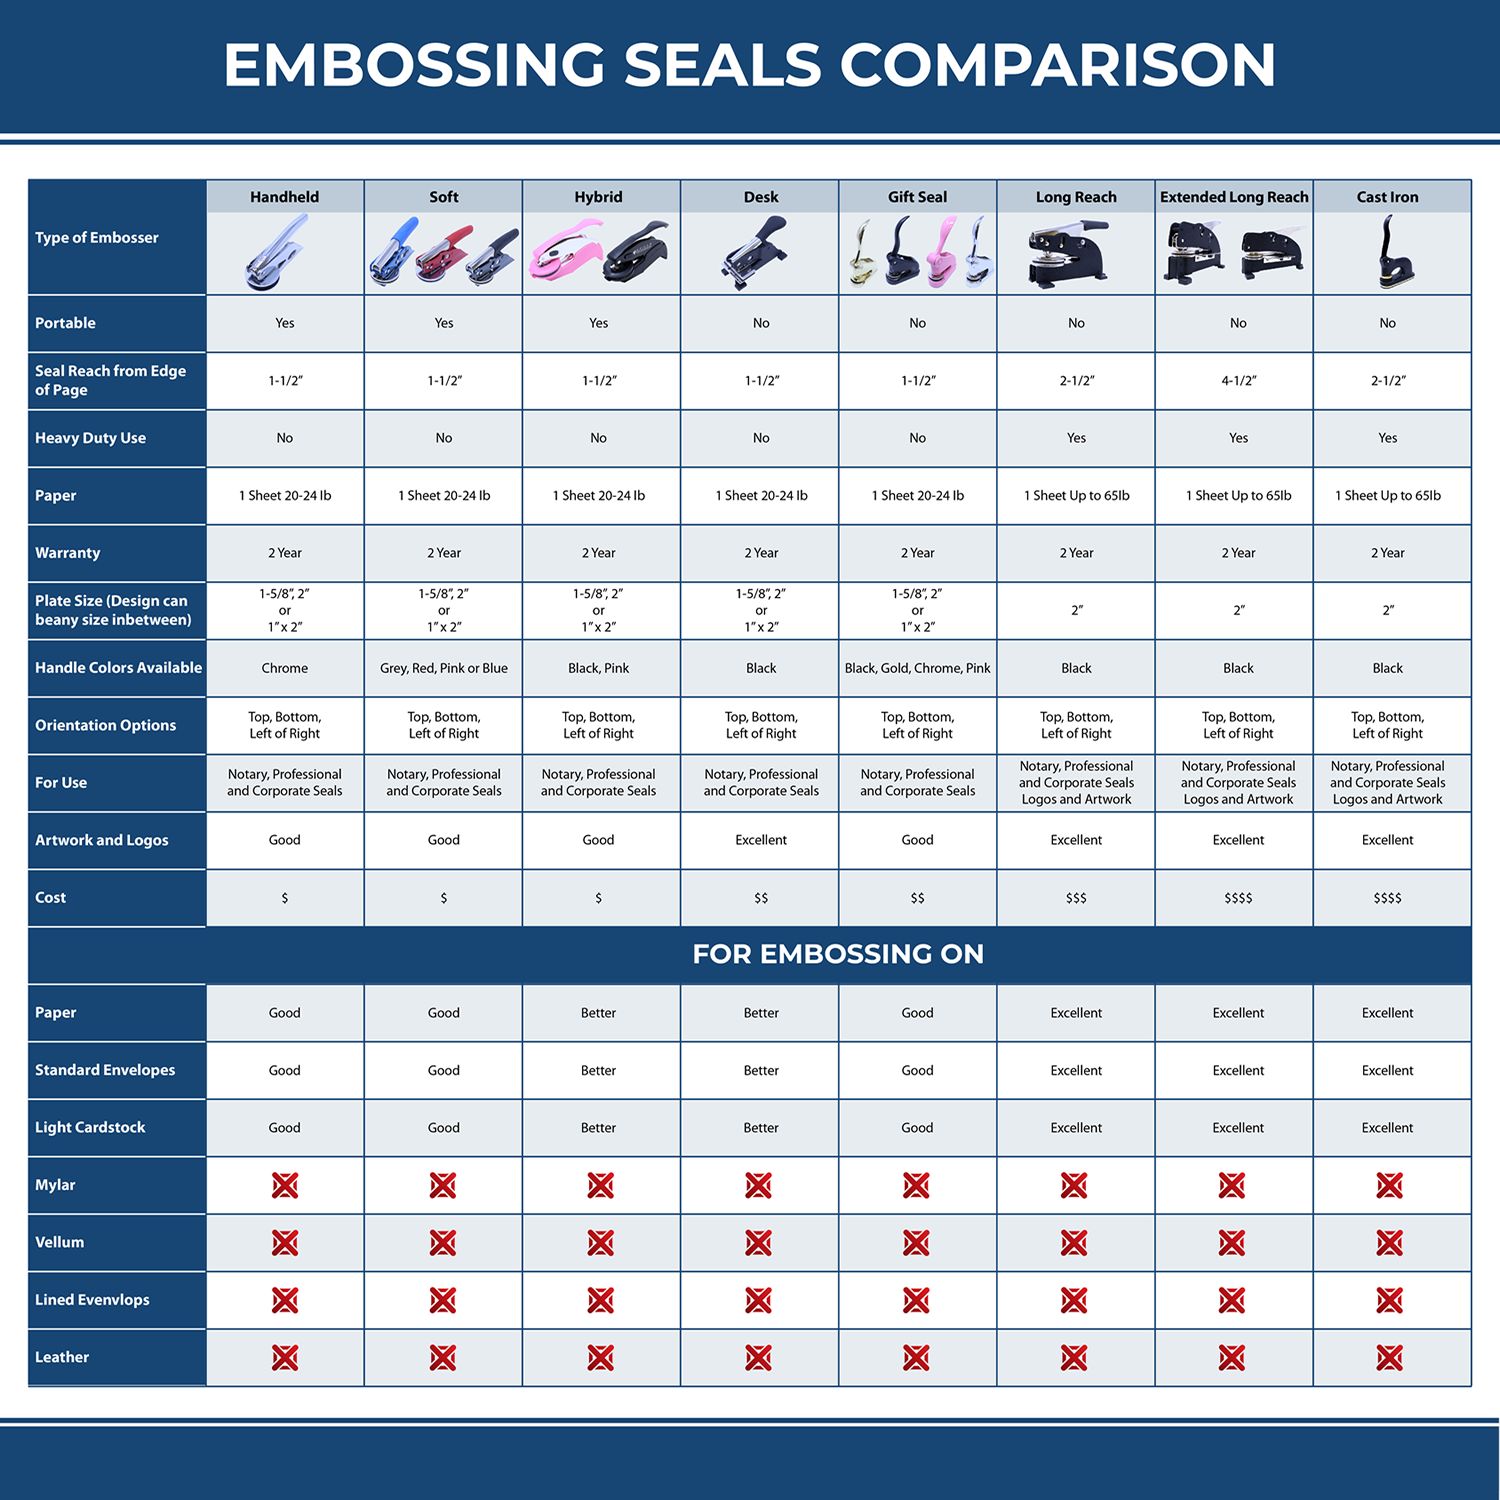 A comparison chart for the different types of mount models available for the Long Reach Oregon PE Seal.